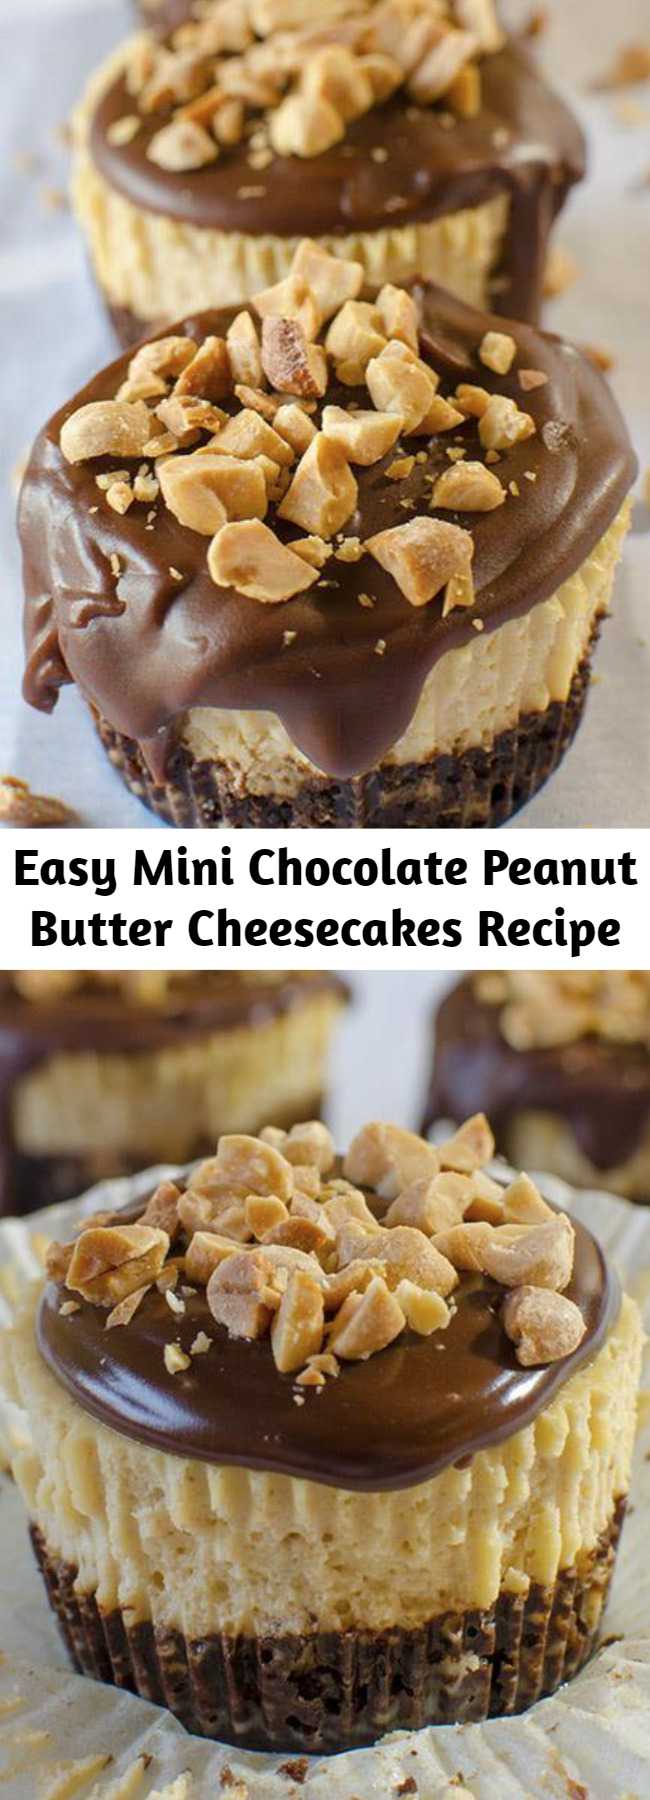 Easy Mini Chocolate Peanut Butter Cheesecakes Recipe - Mini Chocolate Peanut Butter Cheesecakes are delicious individual portions of peanut butter cheesecakes with chocolate graham cracker crust and chocolate ganache topping. This cute homemade cheesecake recipe is a great dessert for your child’s school bake sale, or your next party!